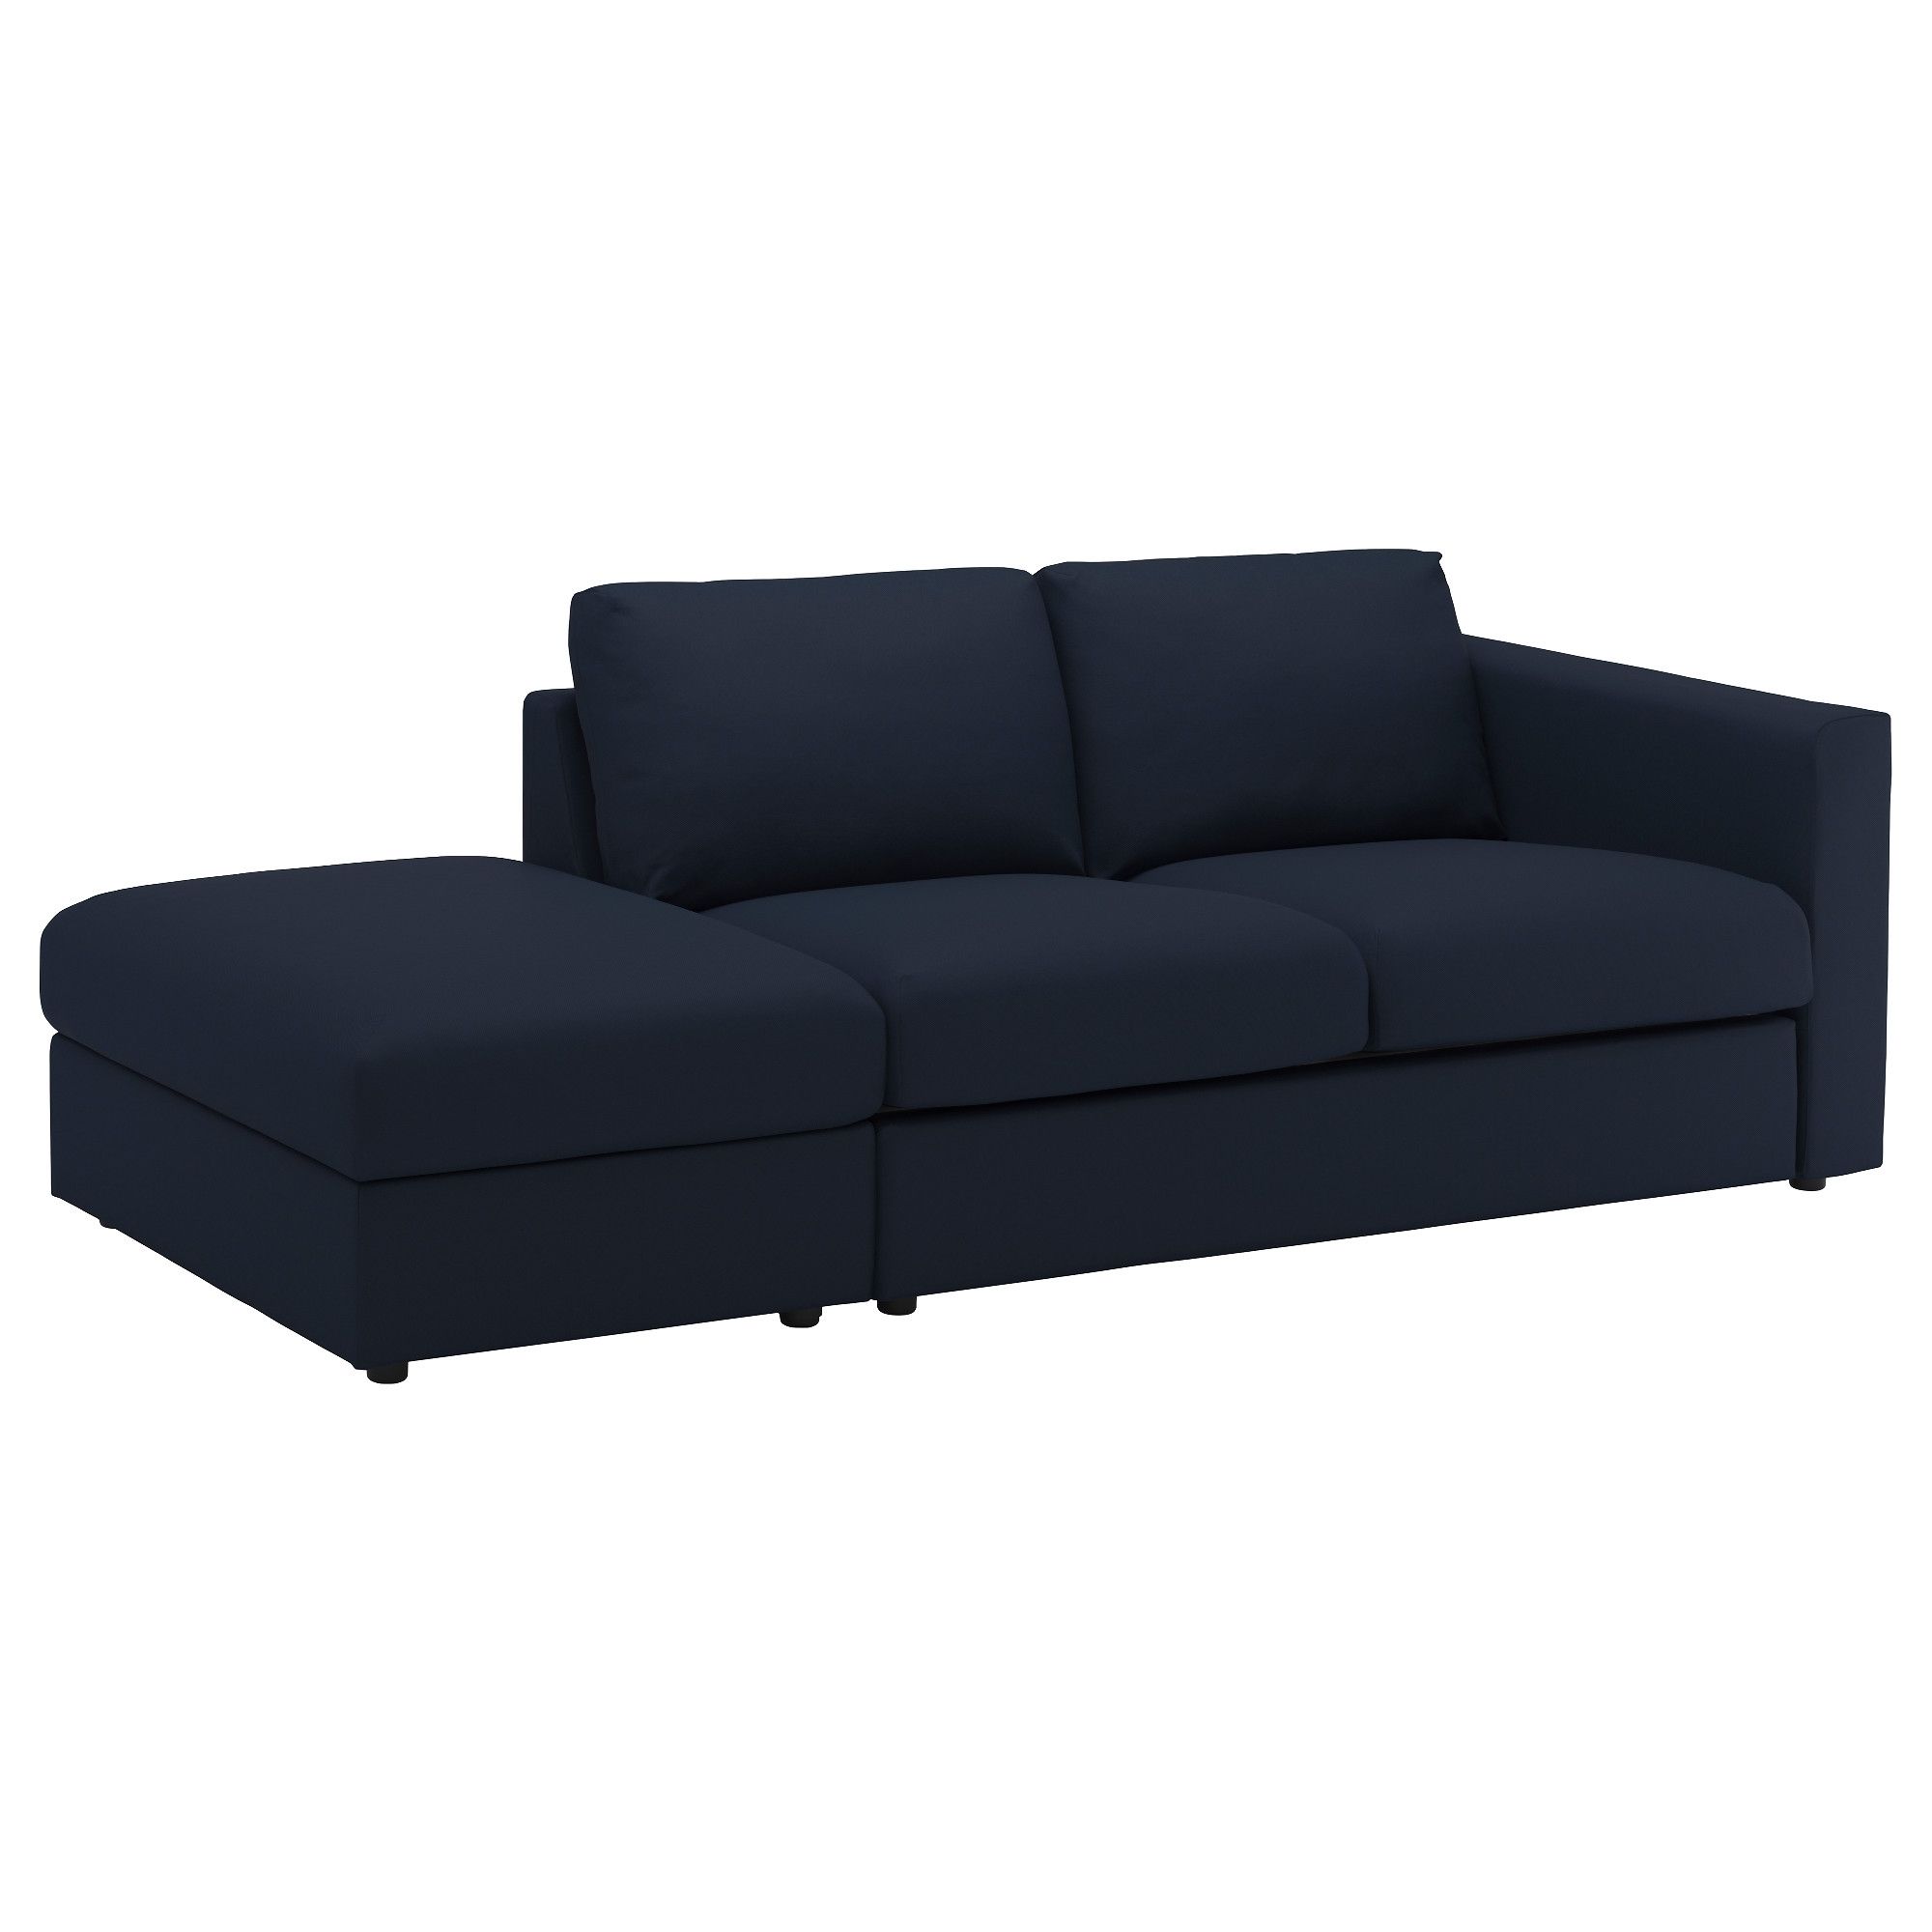 Most Popular Slipcovered Furniture Manufacturers Robin Bruce Furniture Best In Sofas With Removable Cover (View 10 of 15)